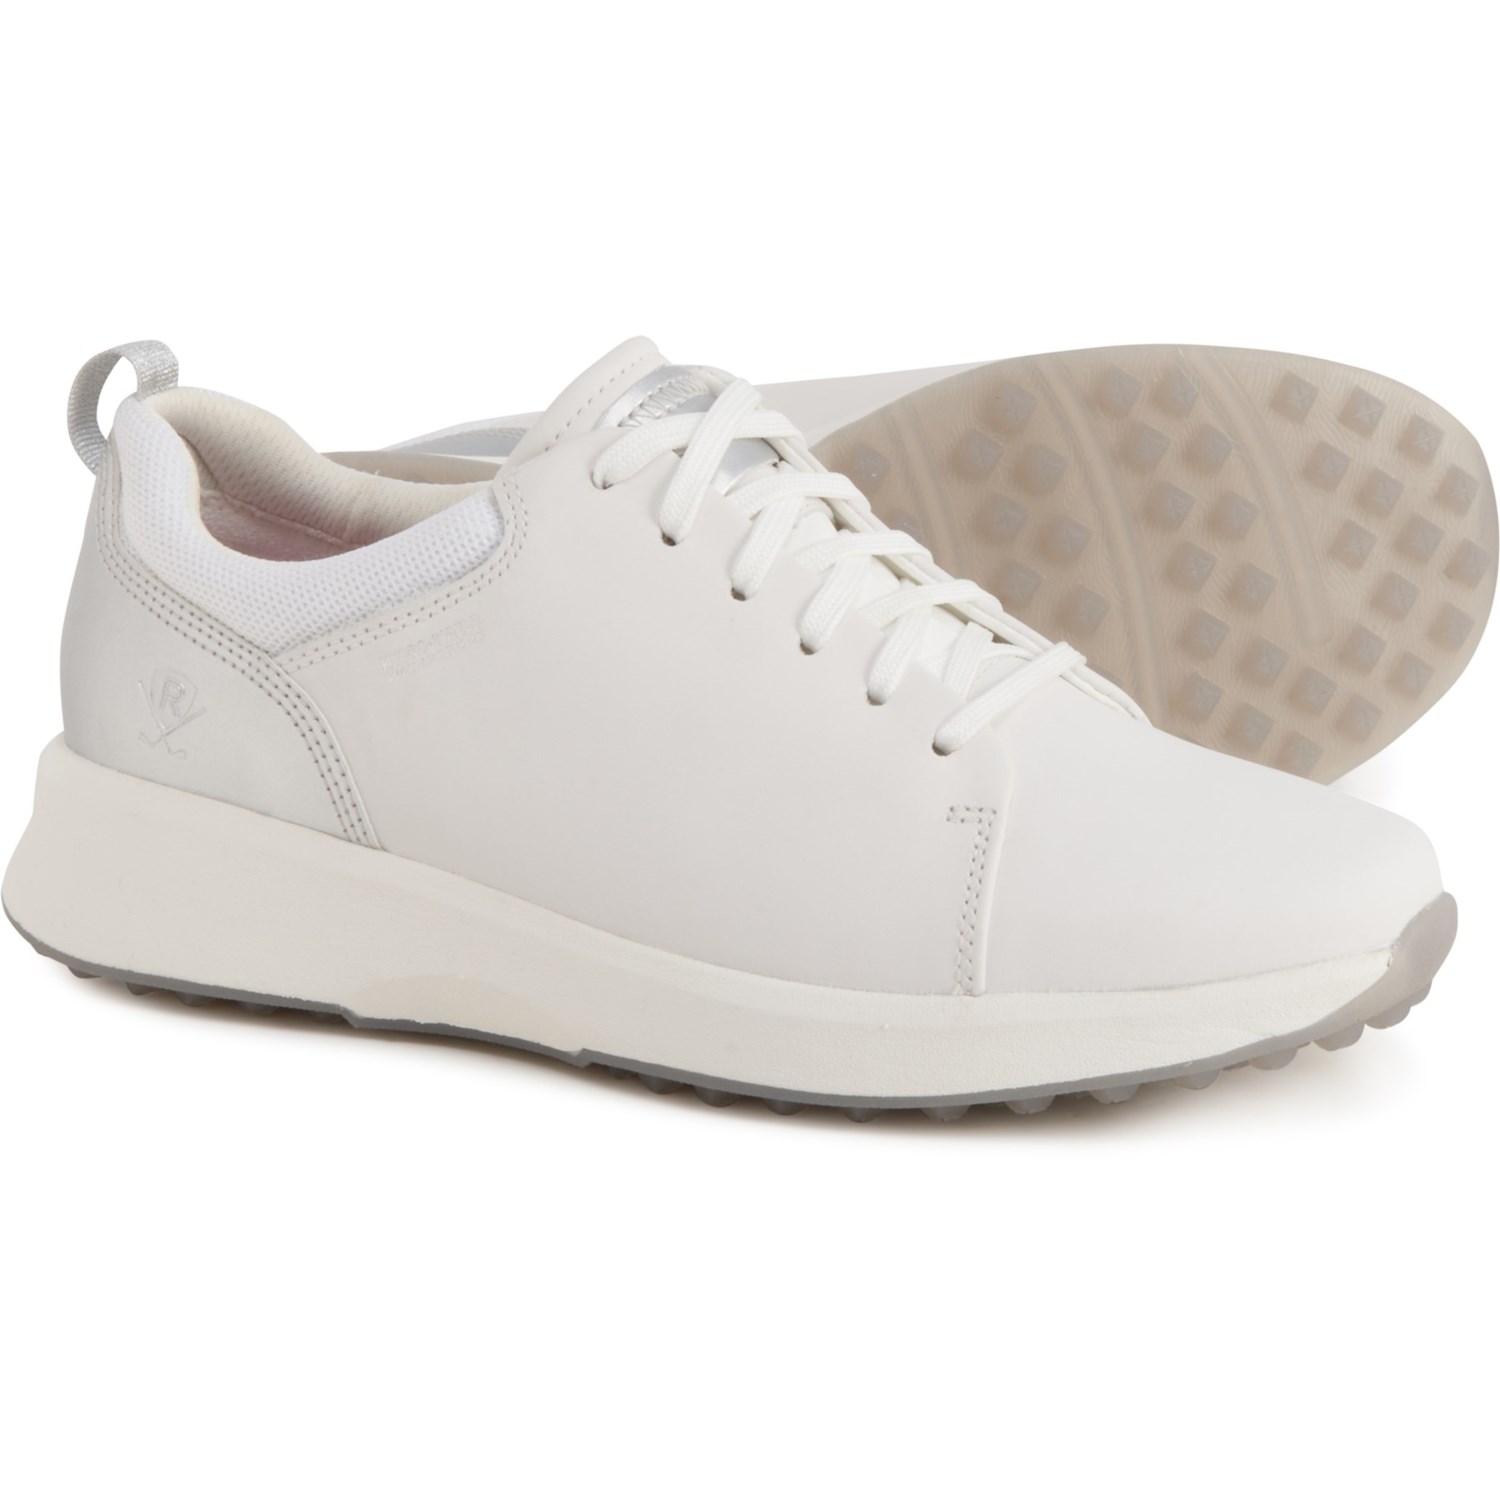 Rockport Golf Shoes (For Women) - Save 33%